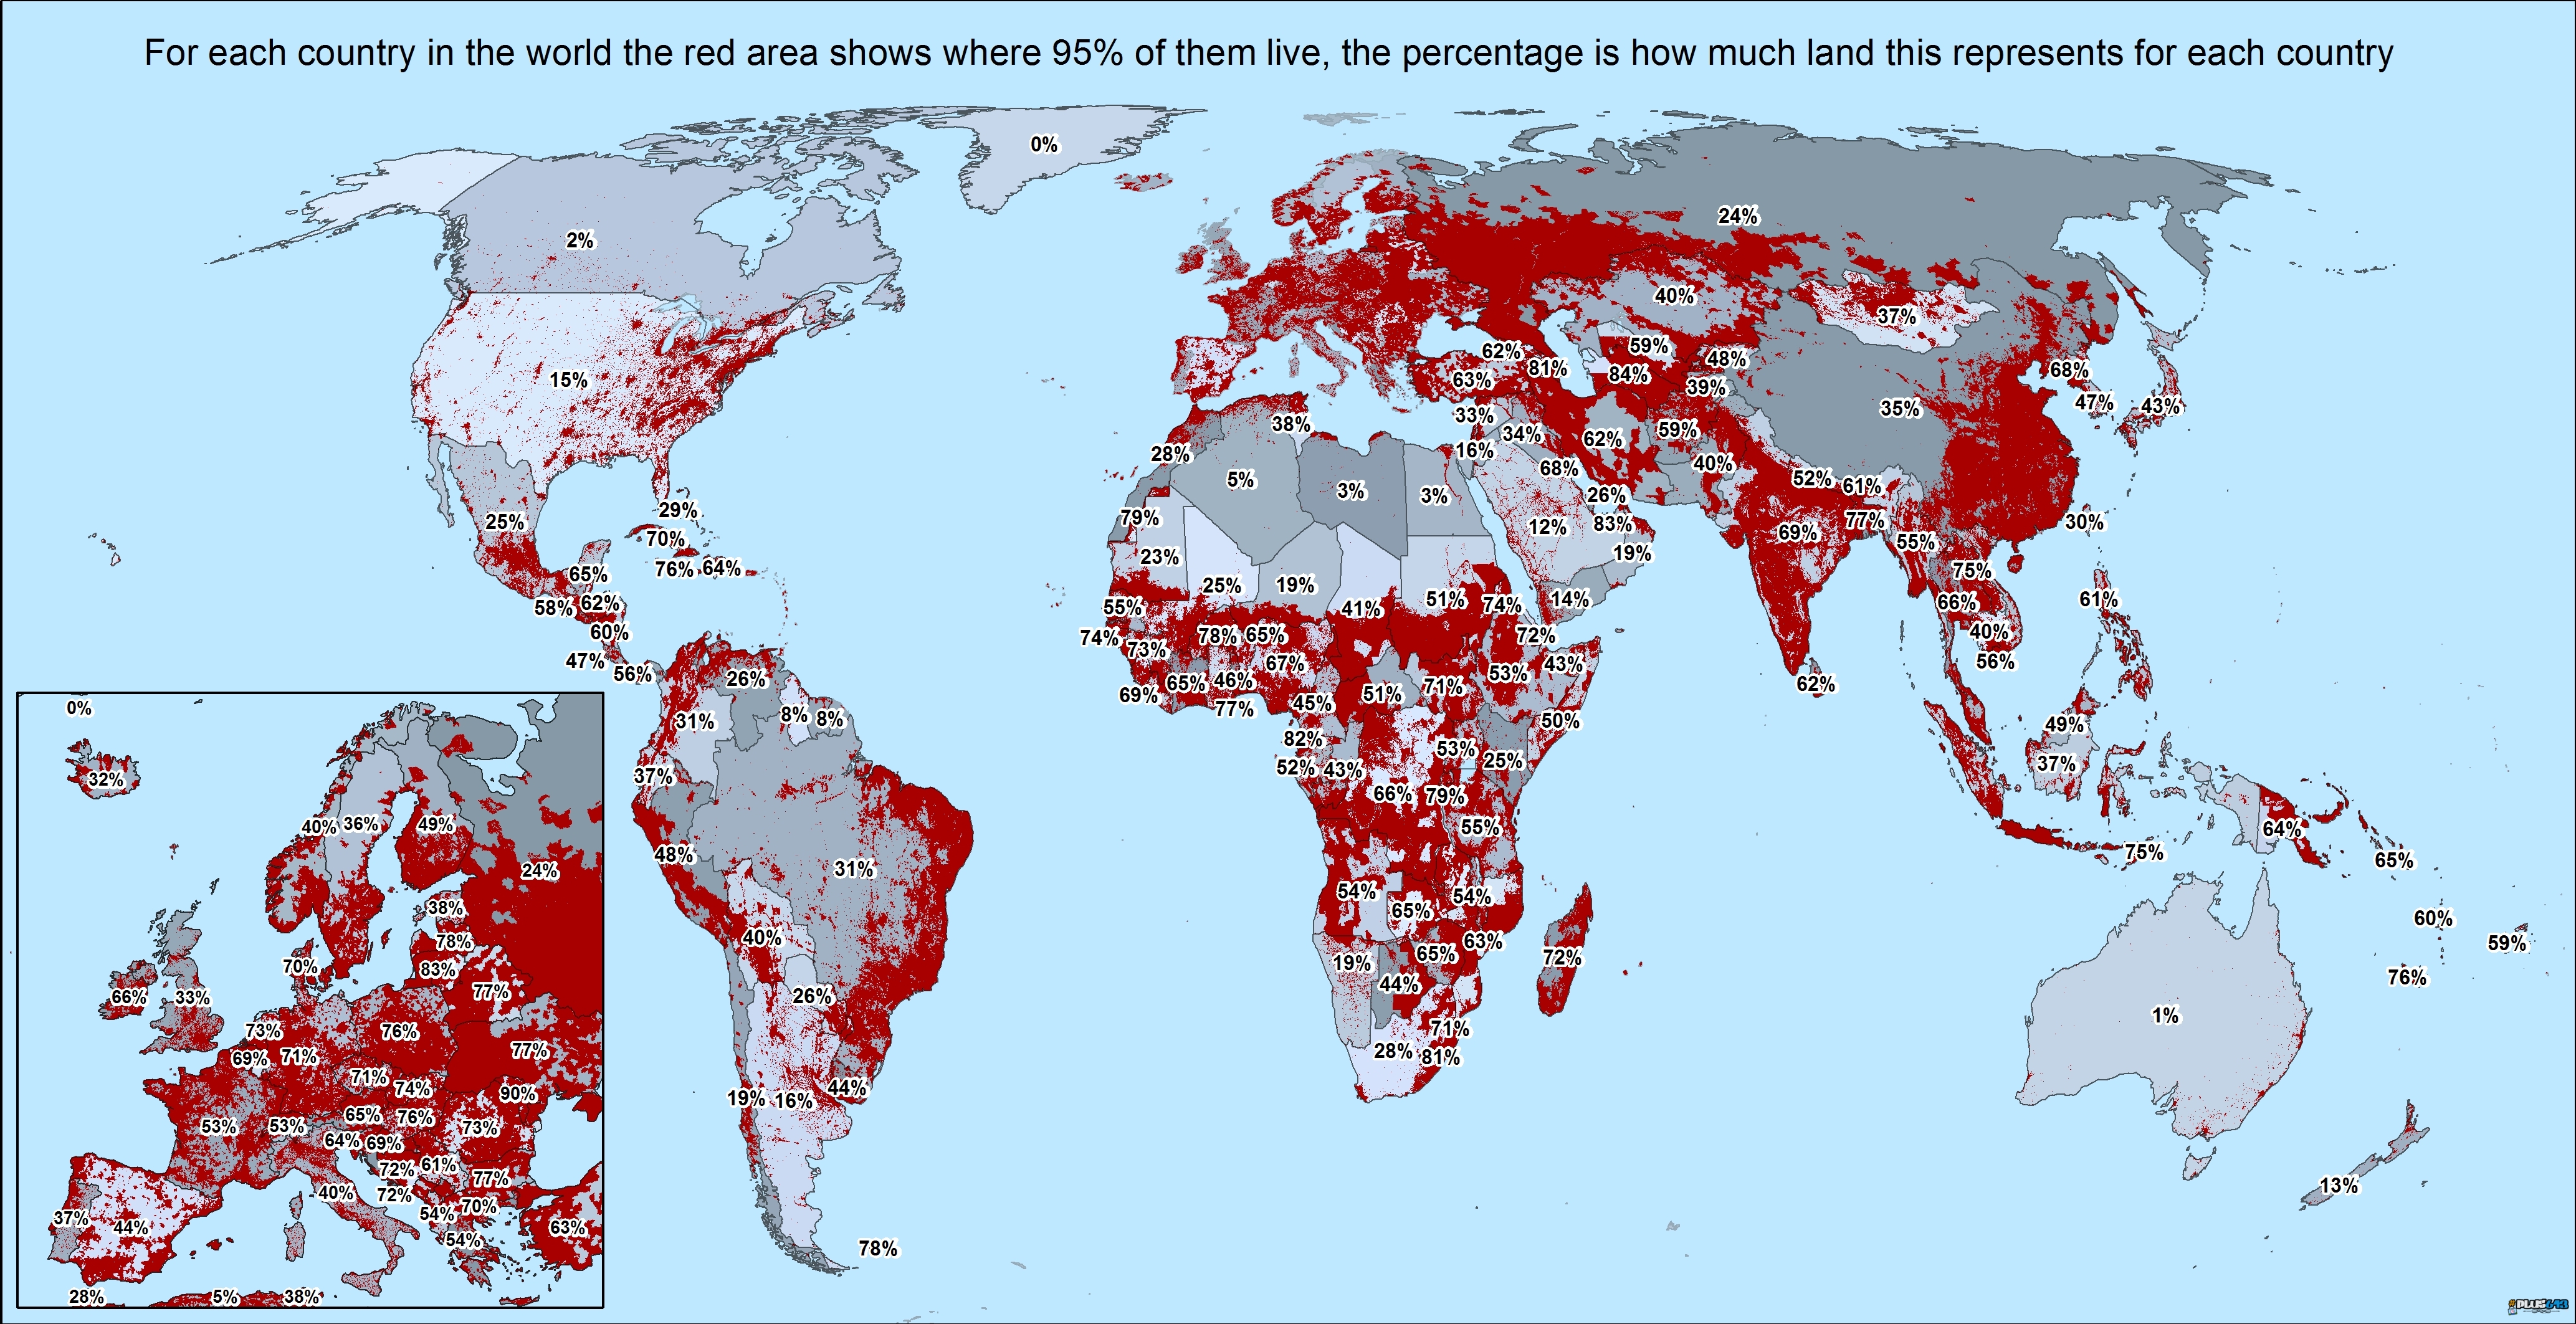 Where the worlds population lives, and how much of the land is taken by people